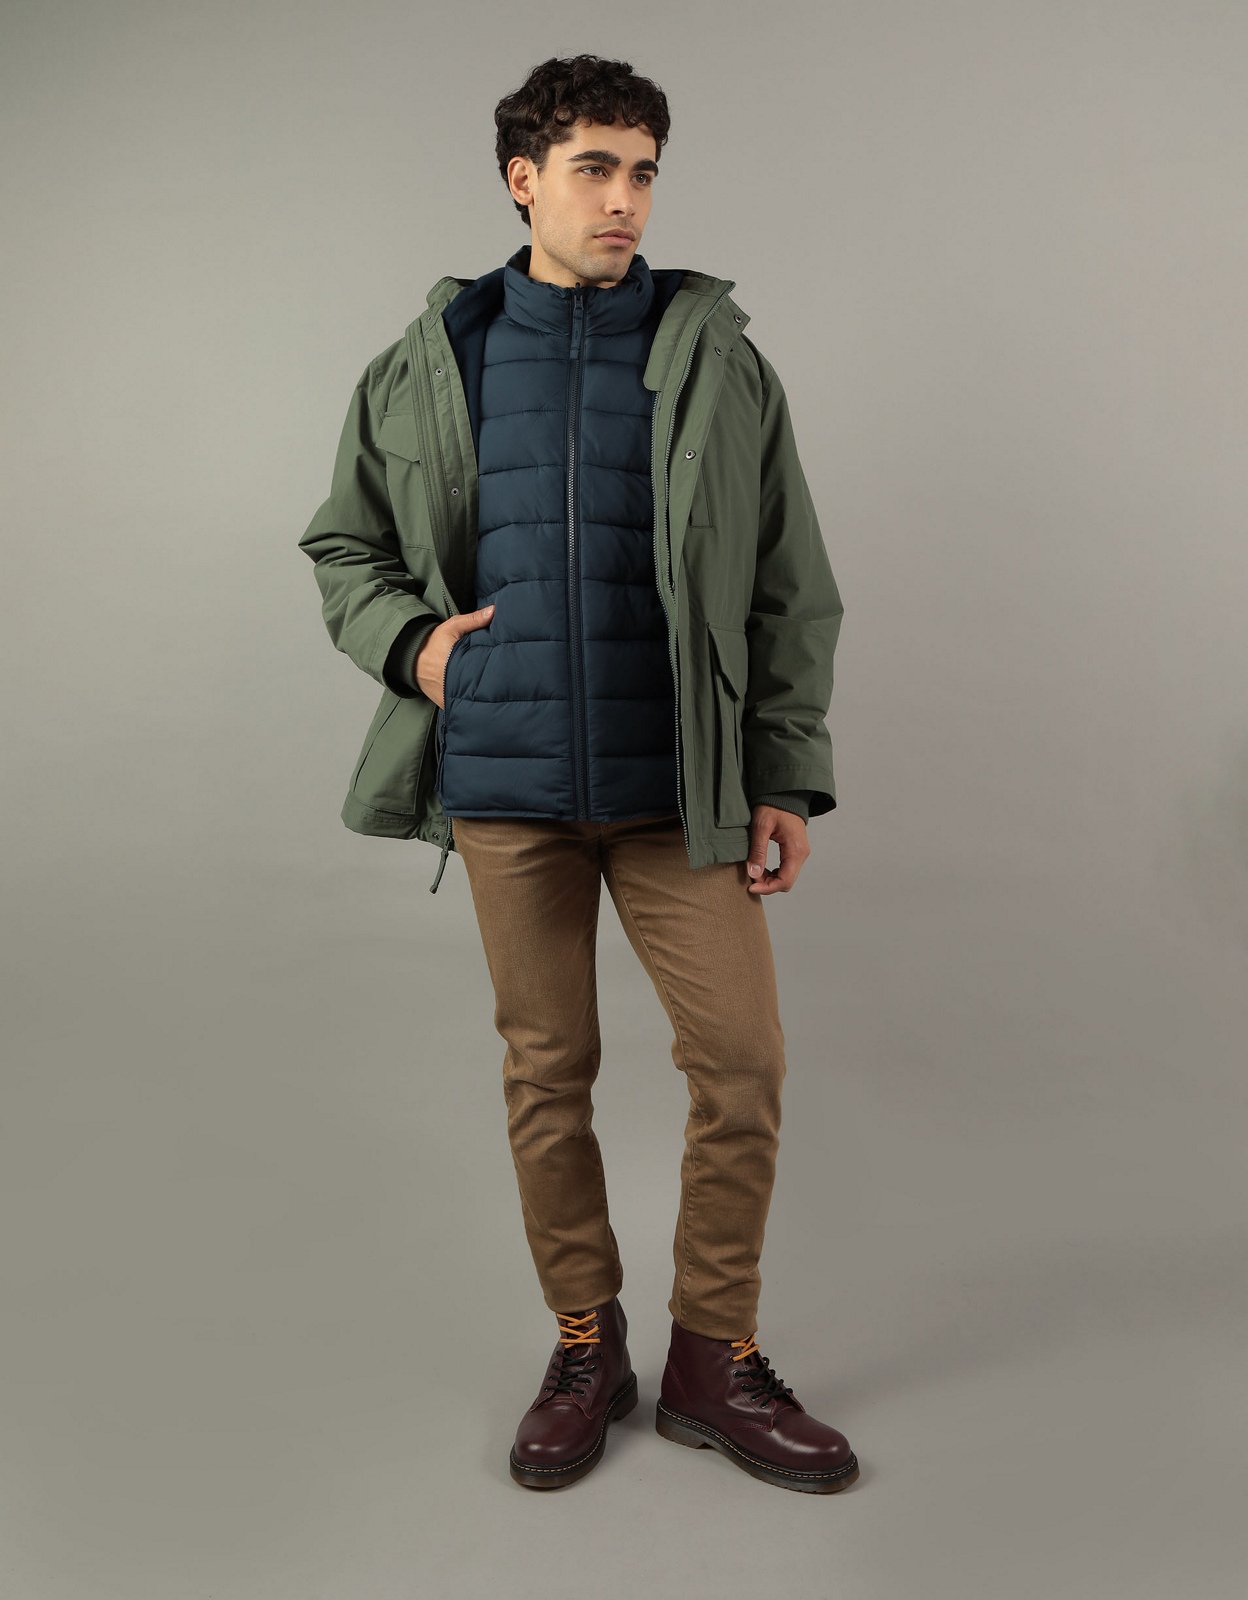 Shop AE Workwear Jacket online | American Eagle Outfitters Kuwait